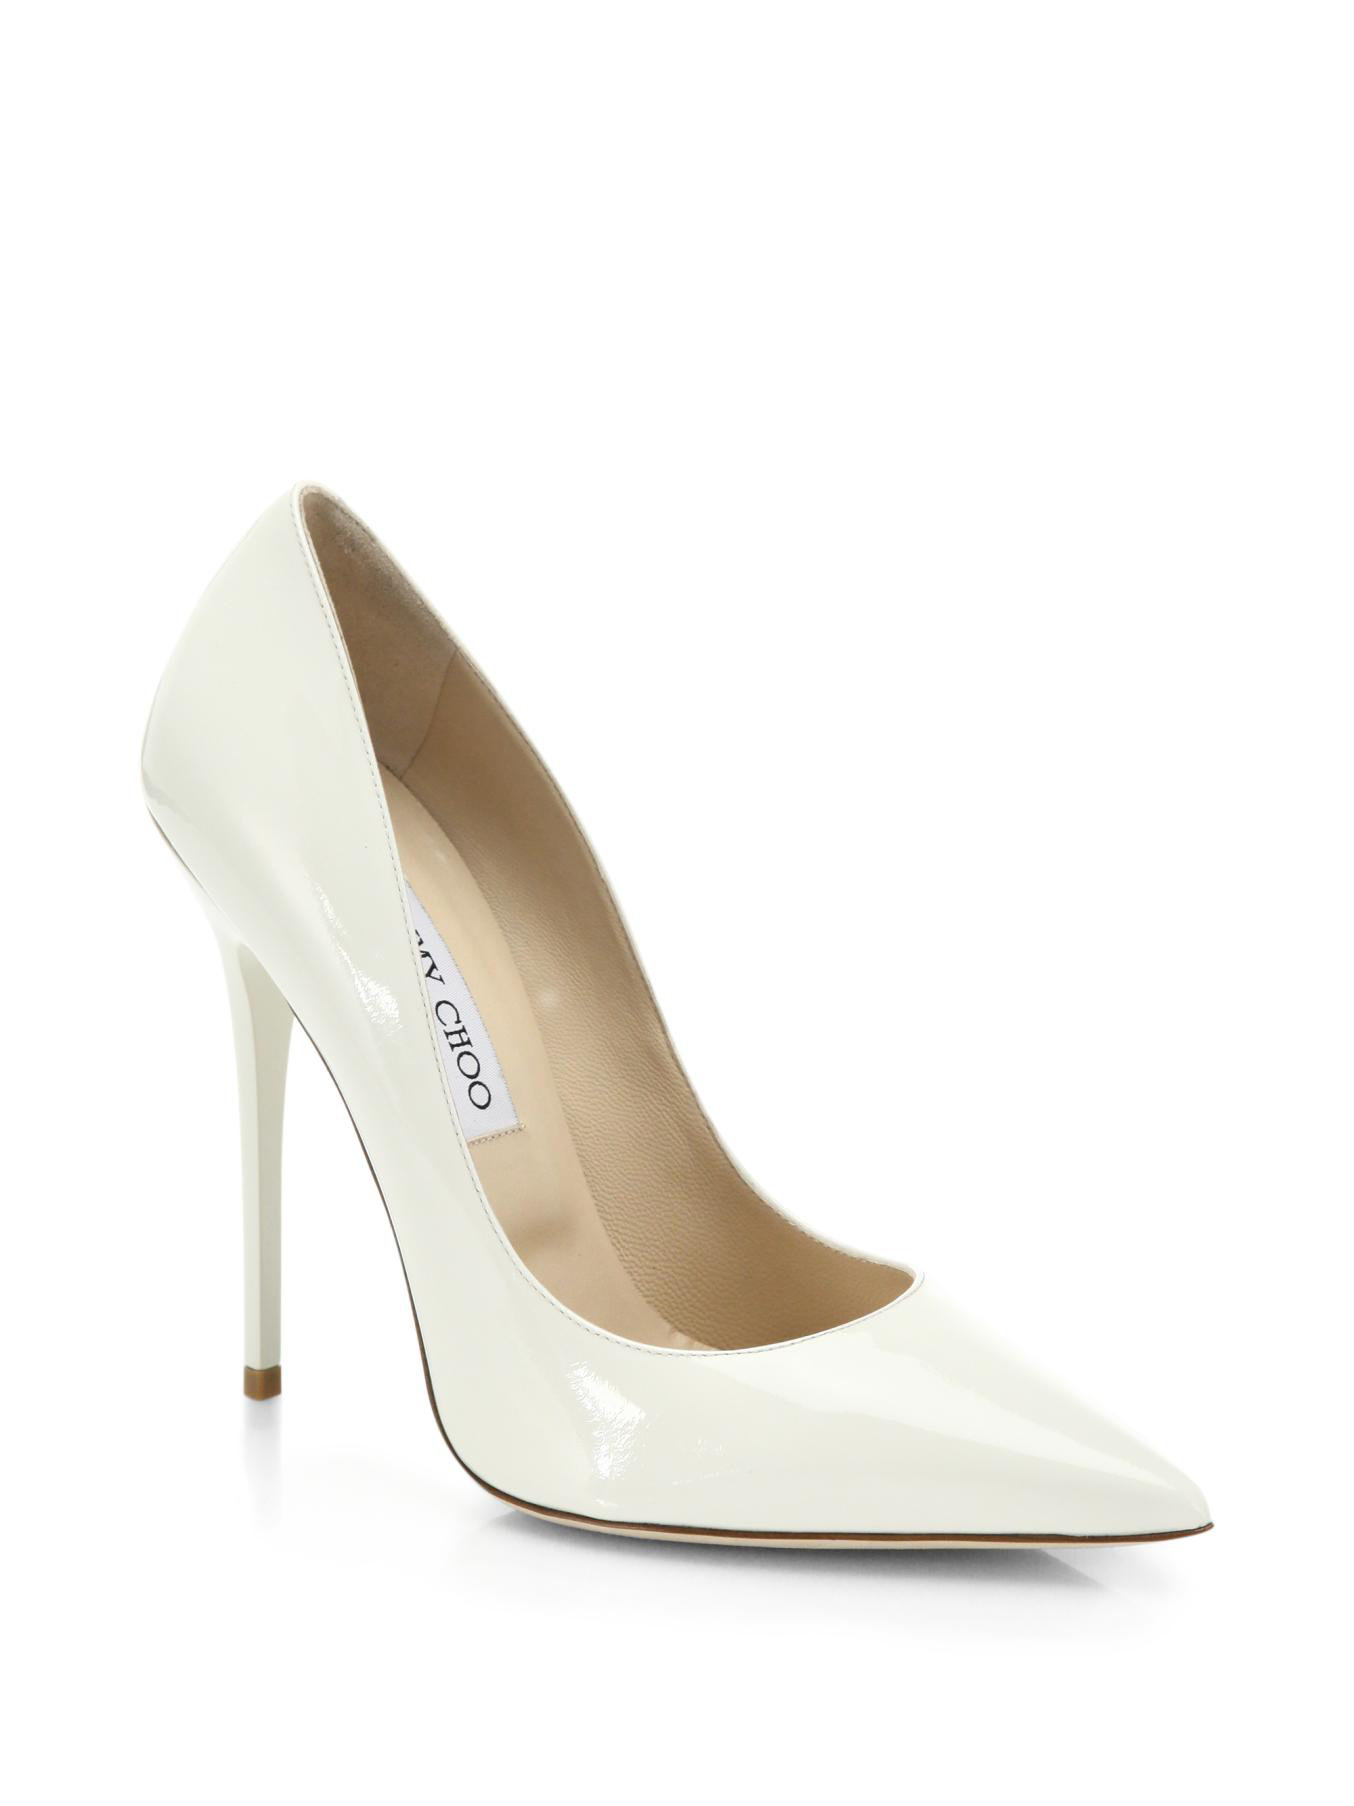 Lyst - Jimmy choo Anouk Patent Leather Point-toe Pumps in White